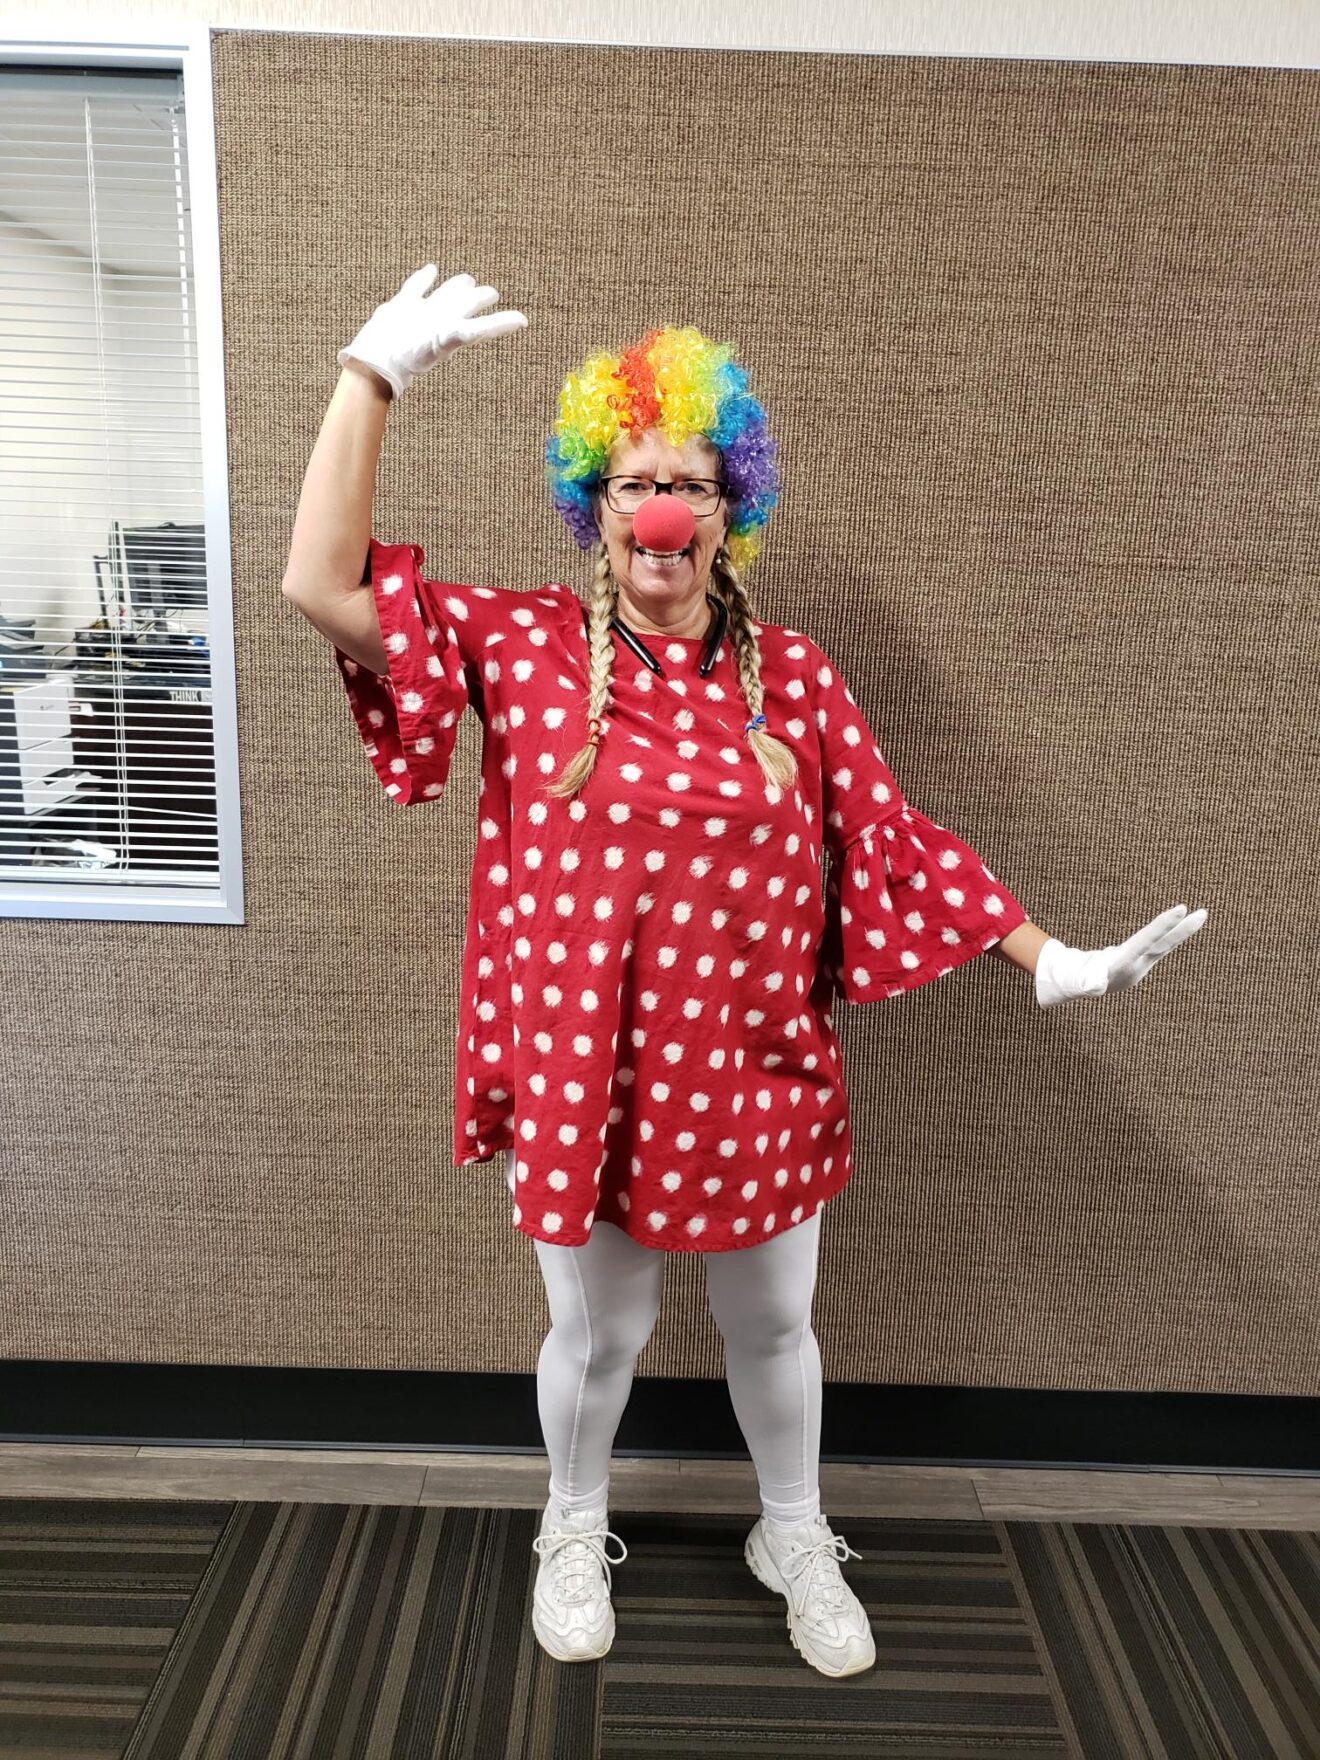 Cristy in a long red tunic with white polka dots and a rainbow wig.